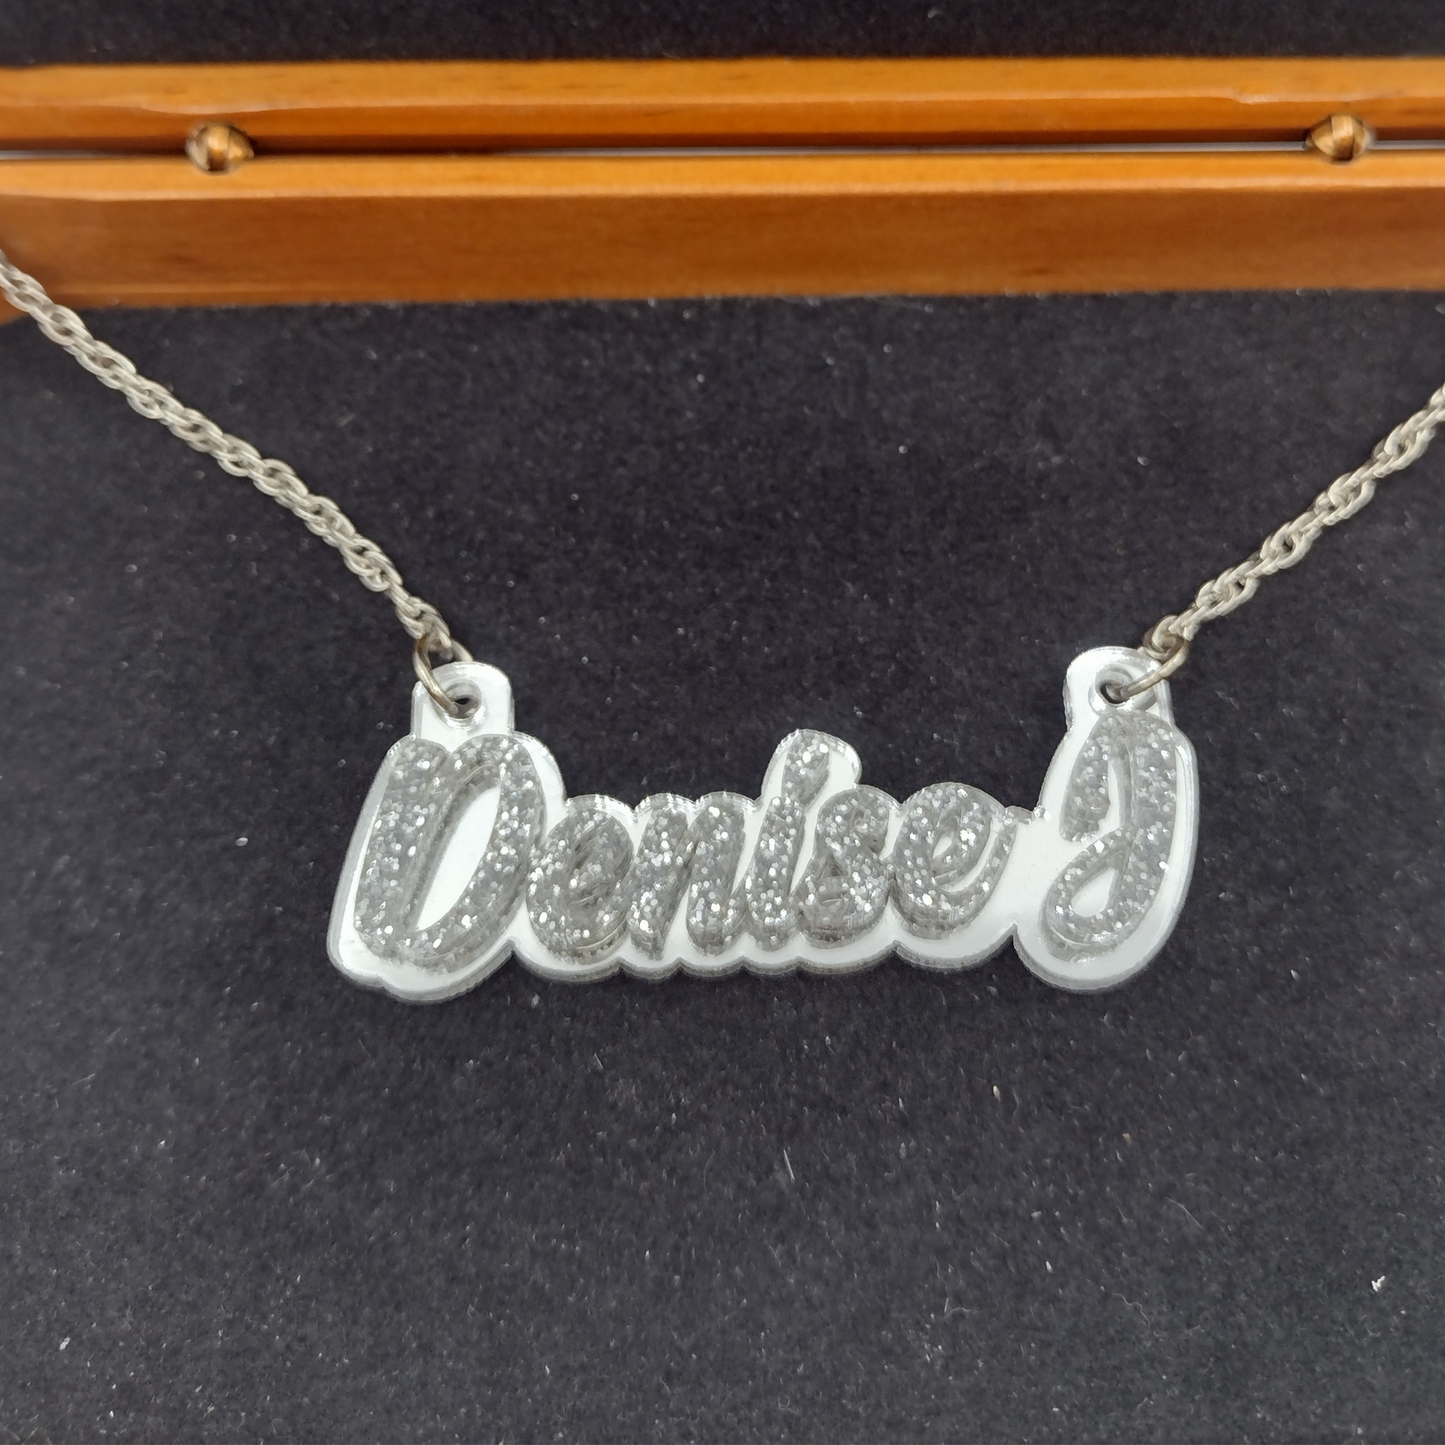 Name Necklace Plate Personalized Custom Silver Nameplate Jewelry Laser Cut Diamond Look Glitter Script Cursive Letters, Quality Silver Chain